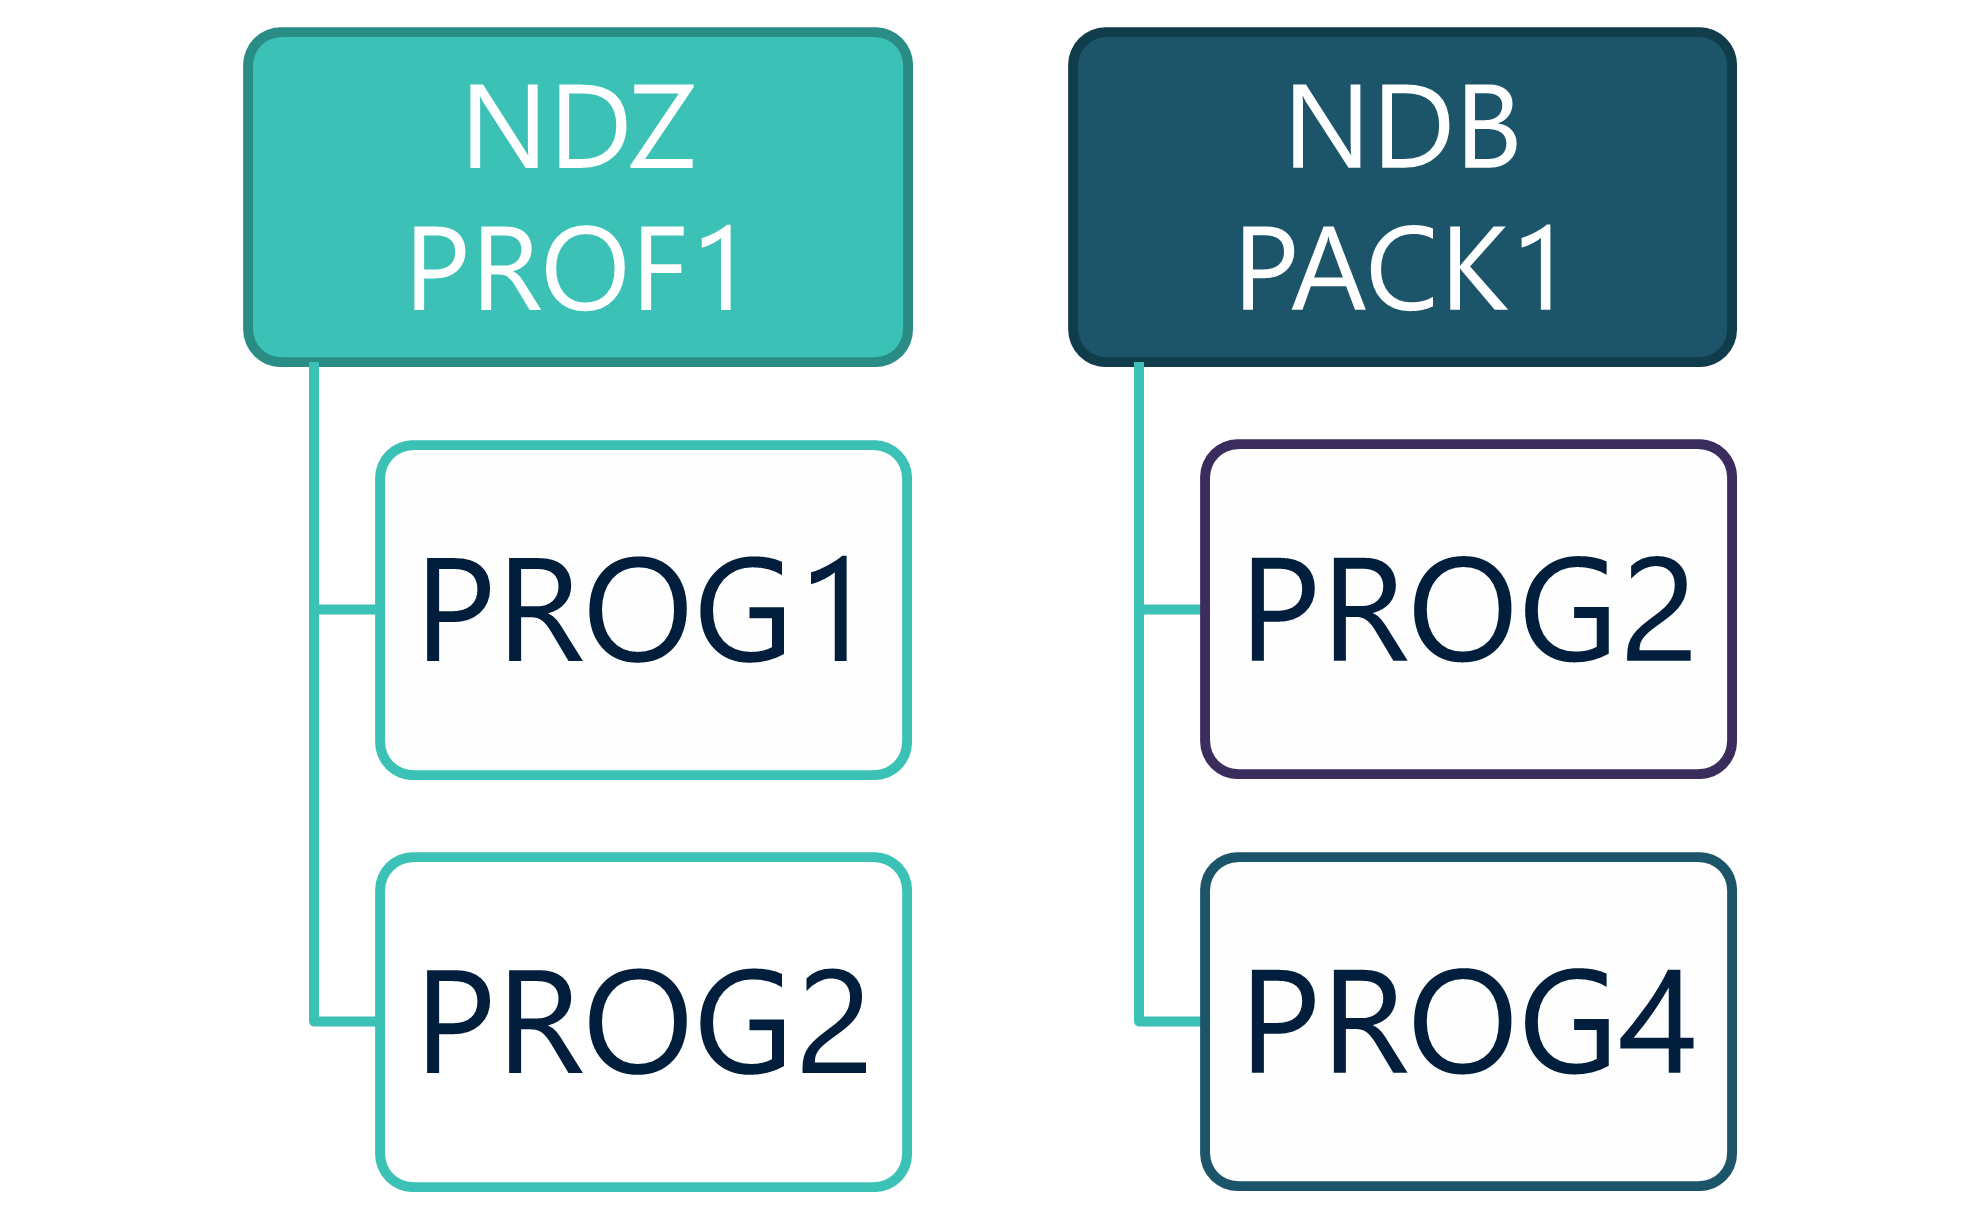 graphic showing an NDZ static generation done for Natural programs PROG1 and PROG2 contained in the         SQLJ profile and package PROF1 and an NDB static generation done for Natural programs PROG2 and PROG3 contained in package PACK1